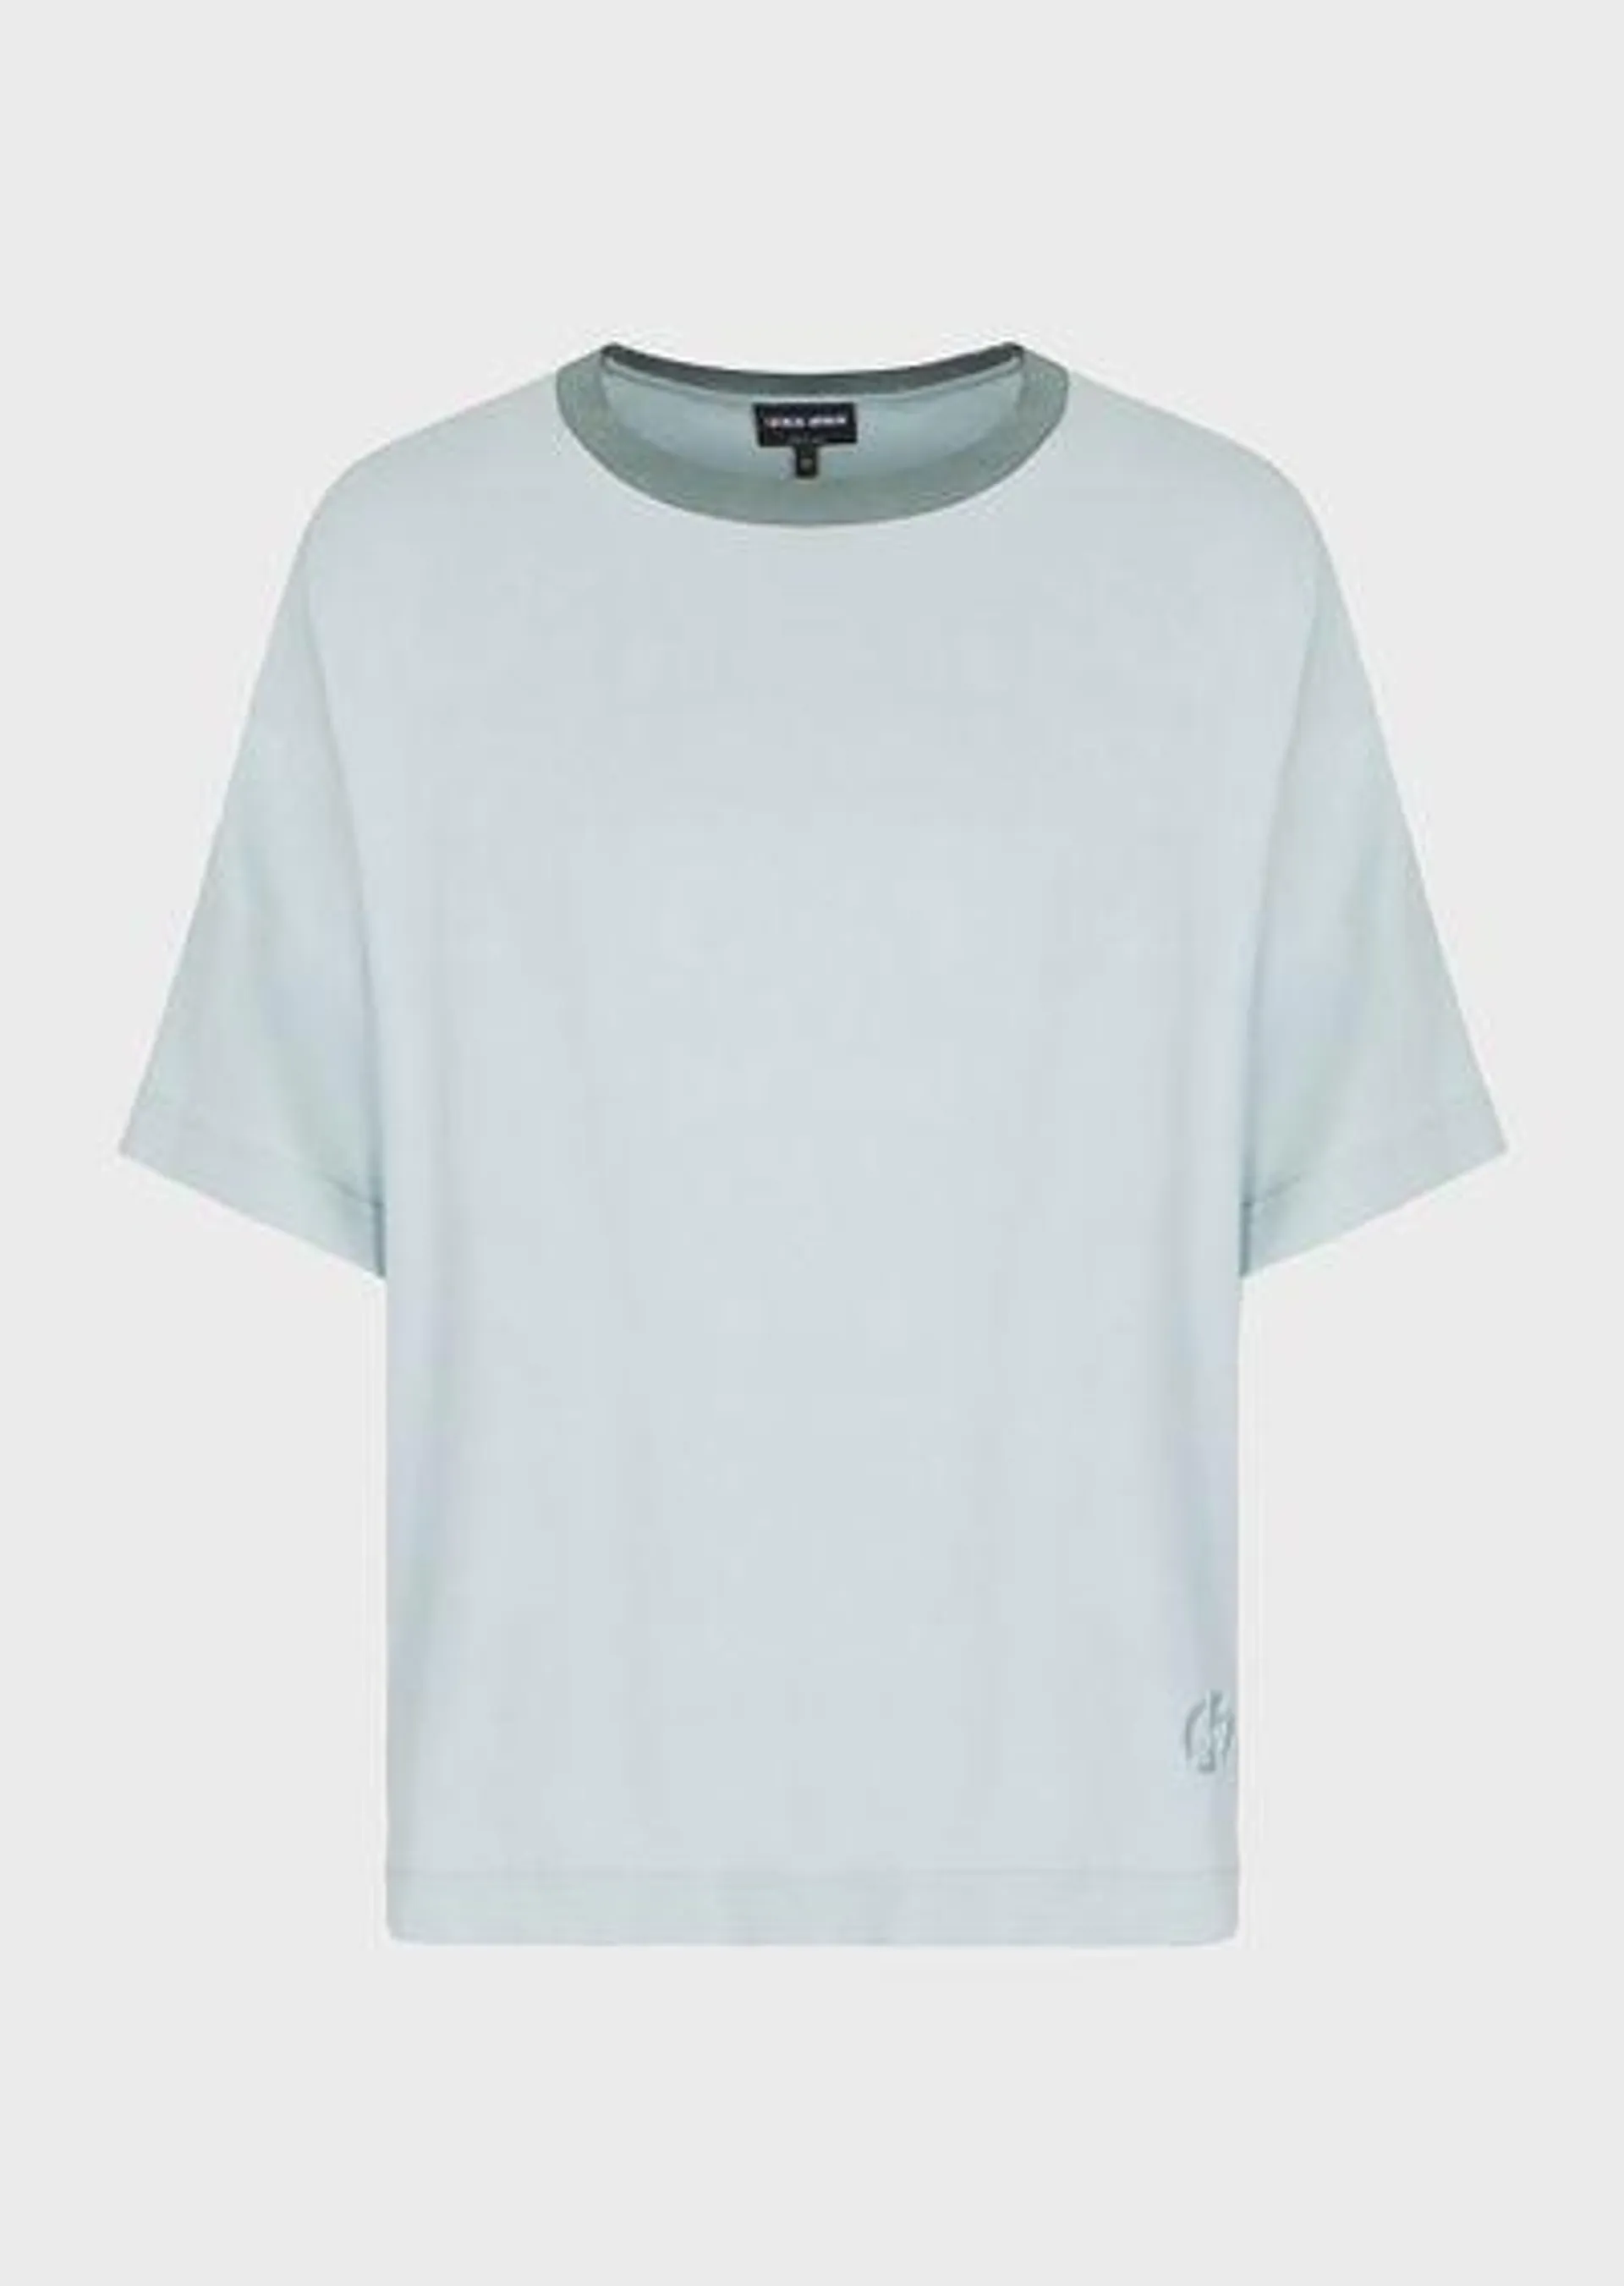 Denim Collection oversized Lyocell T-shirt